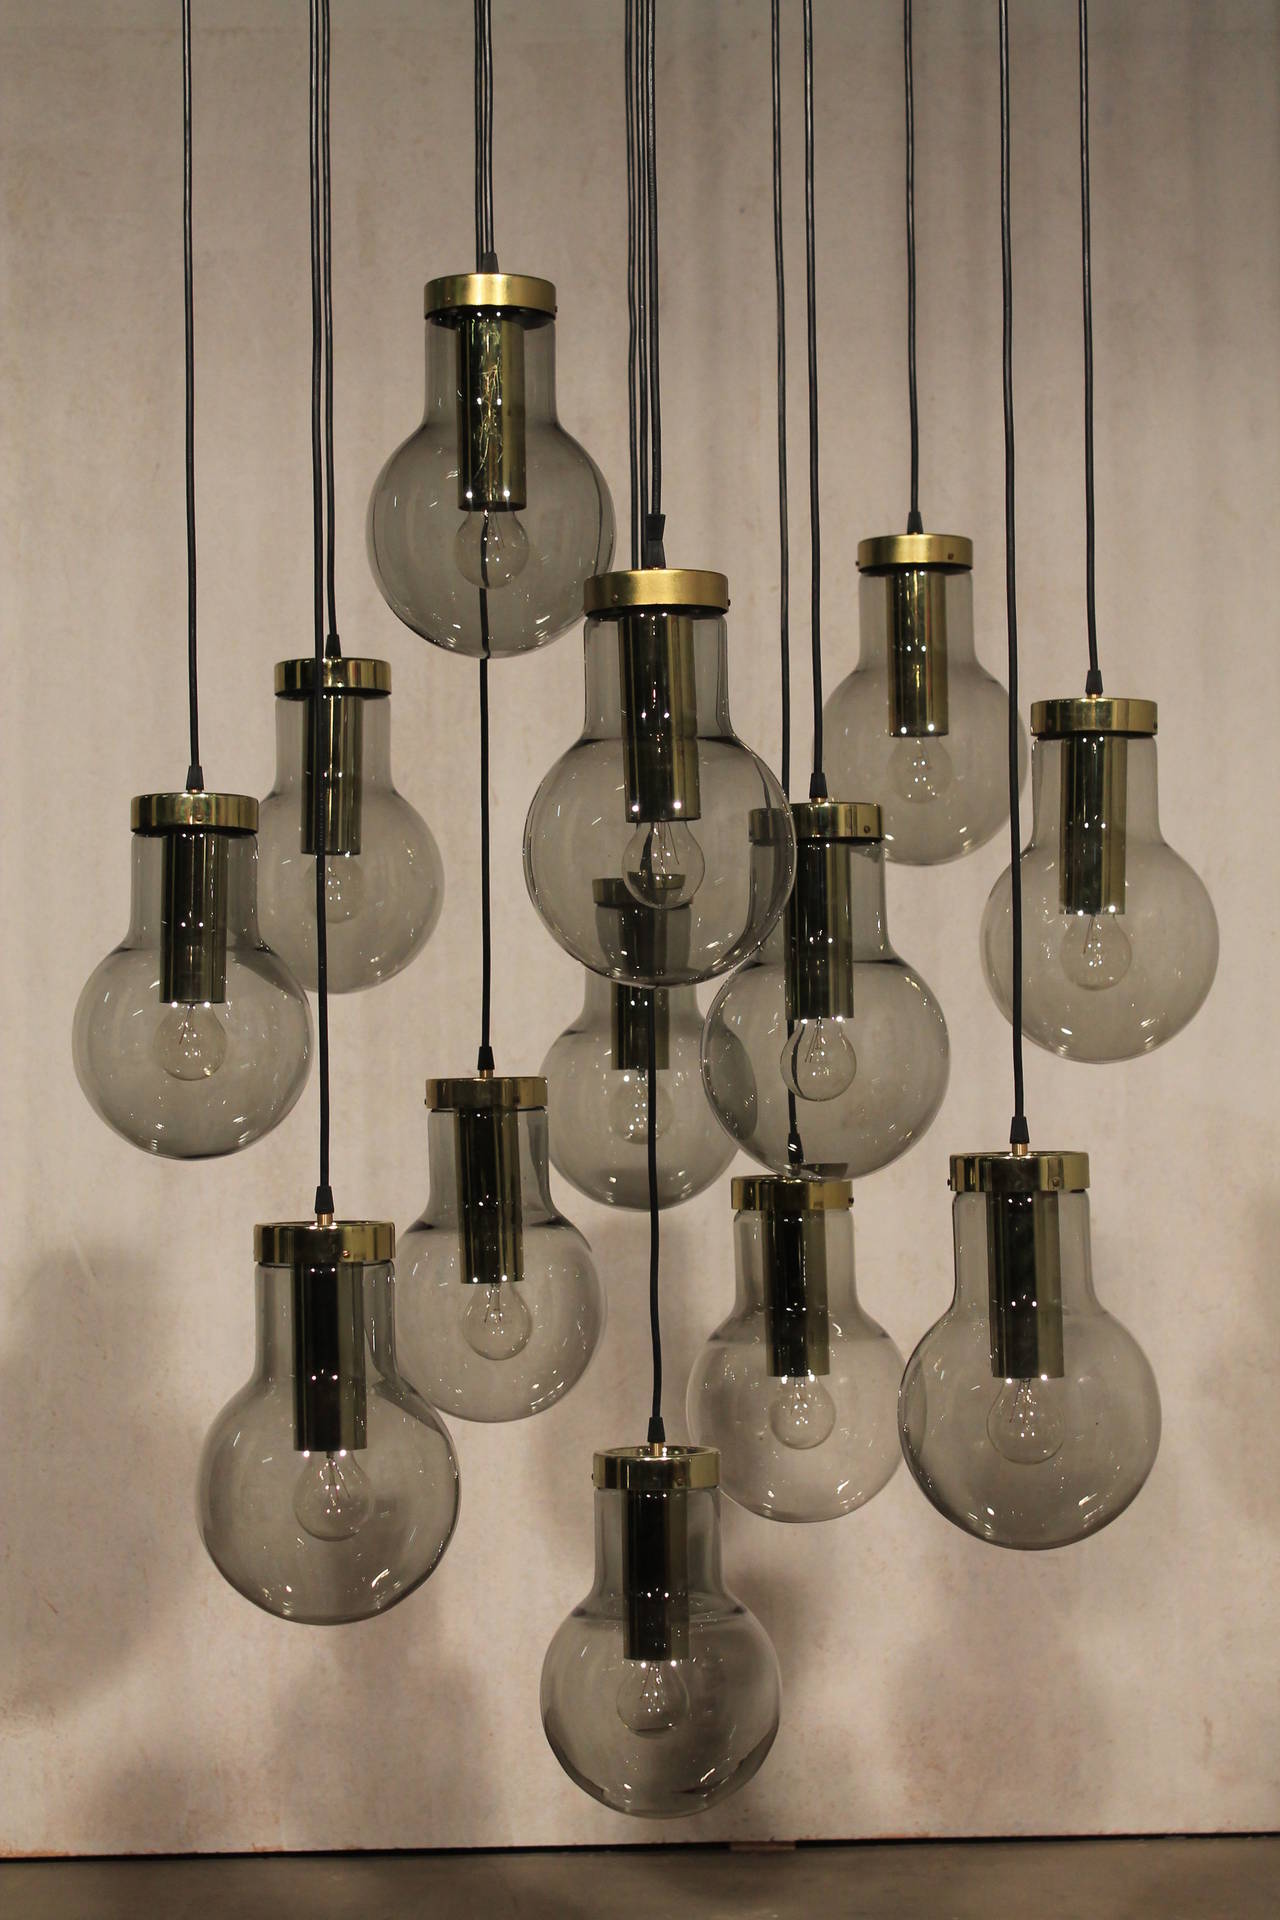 Impressive large maxi bulb chandelier, Holland, 1960s. 

13 maxi bulb smoked glasses with brass hardware.

Rewired also for US, adjustable in height.

Diameter ceiling plate 80 cm or 31.5